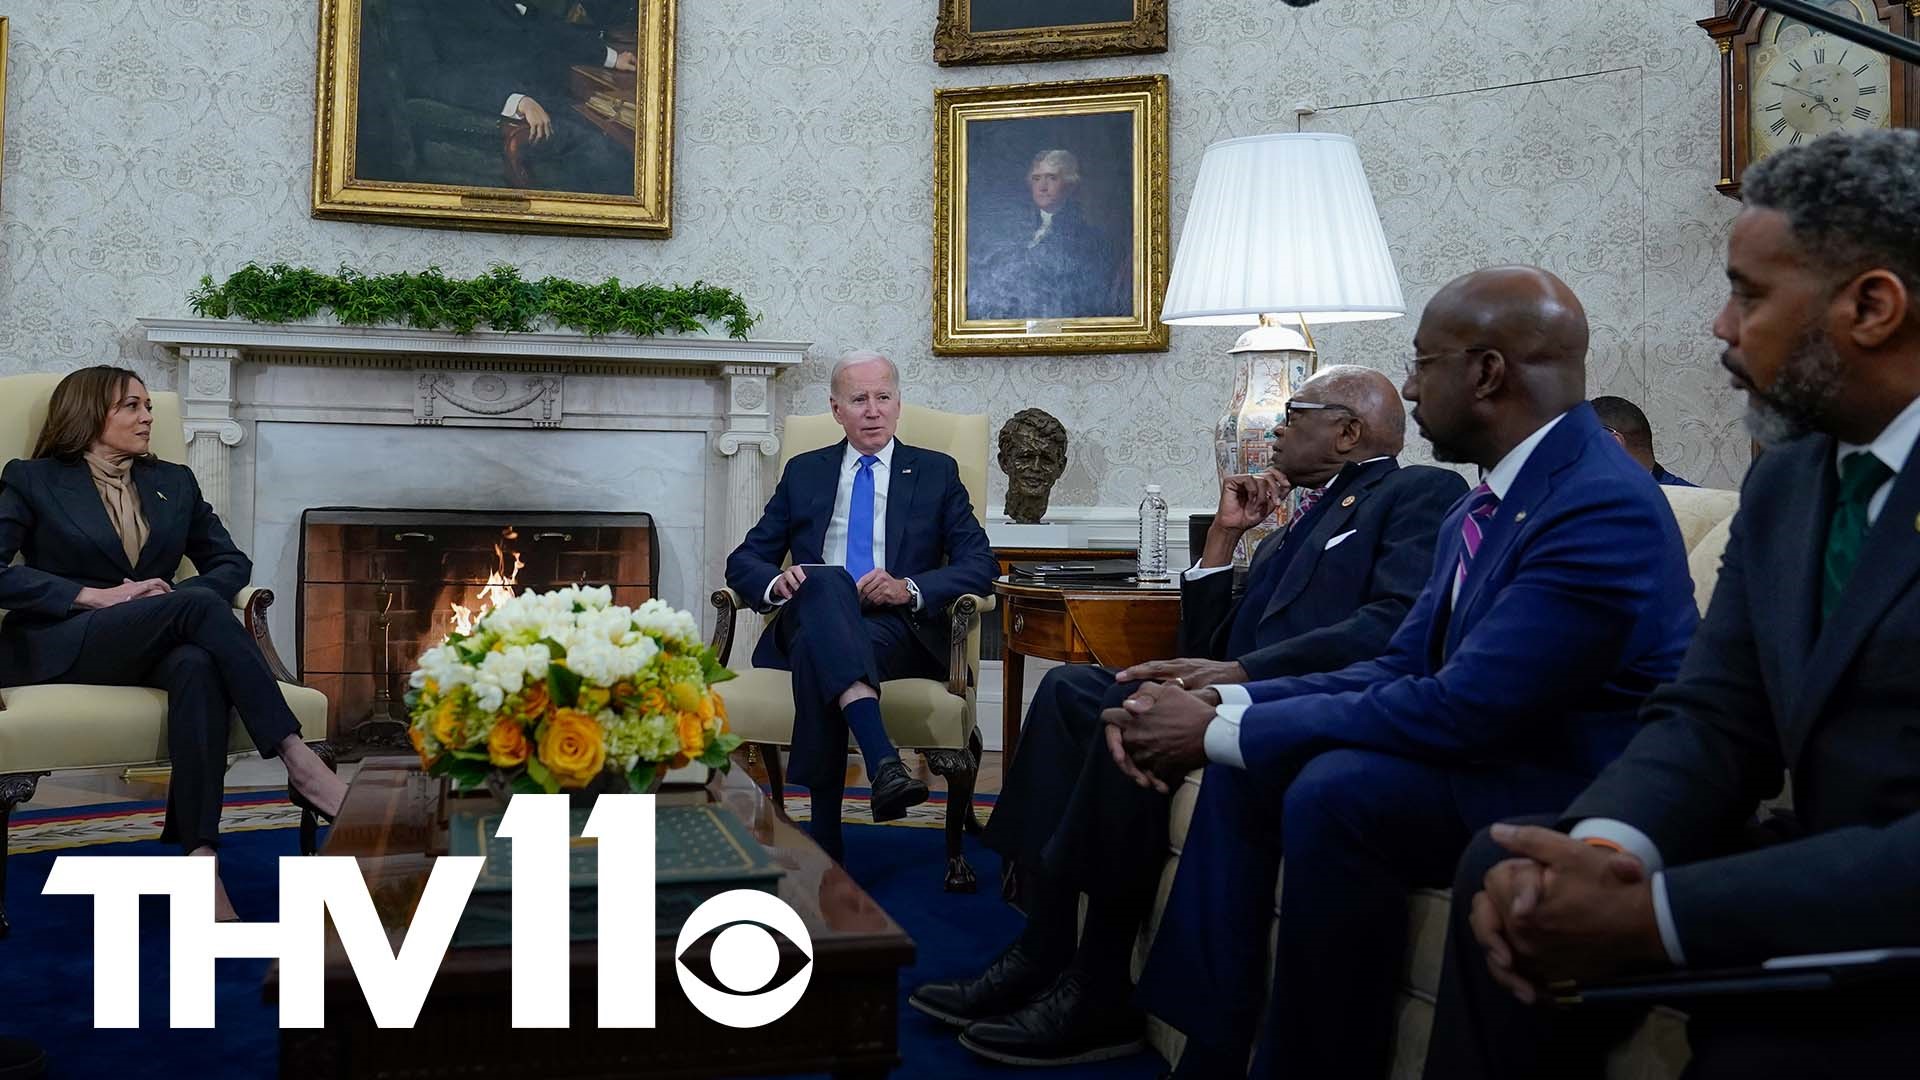 The president met with members of the Congressional Black Caucus to discuss how to address the issue of policing in America following the death of Tyre Nichols.